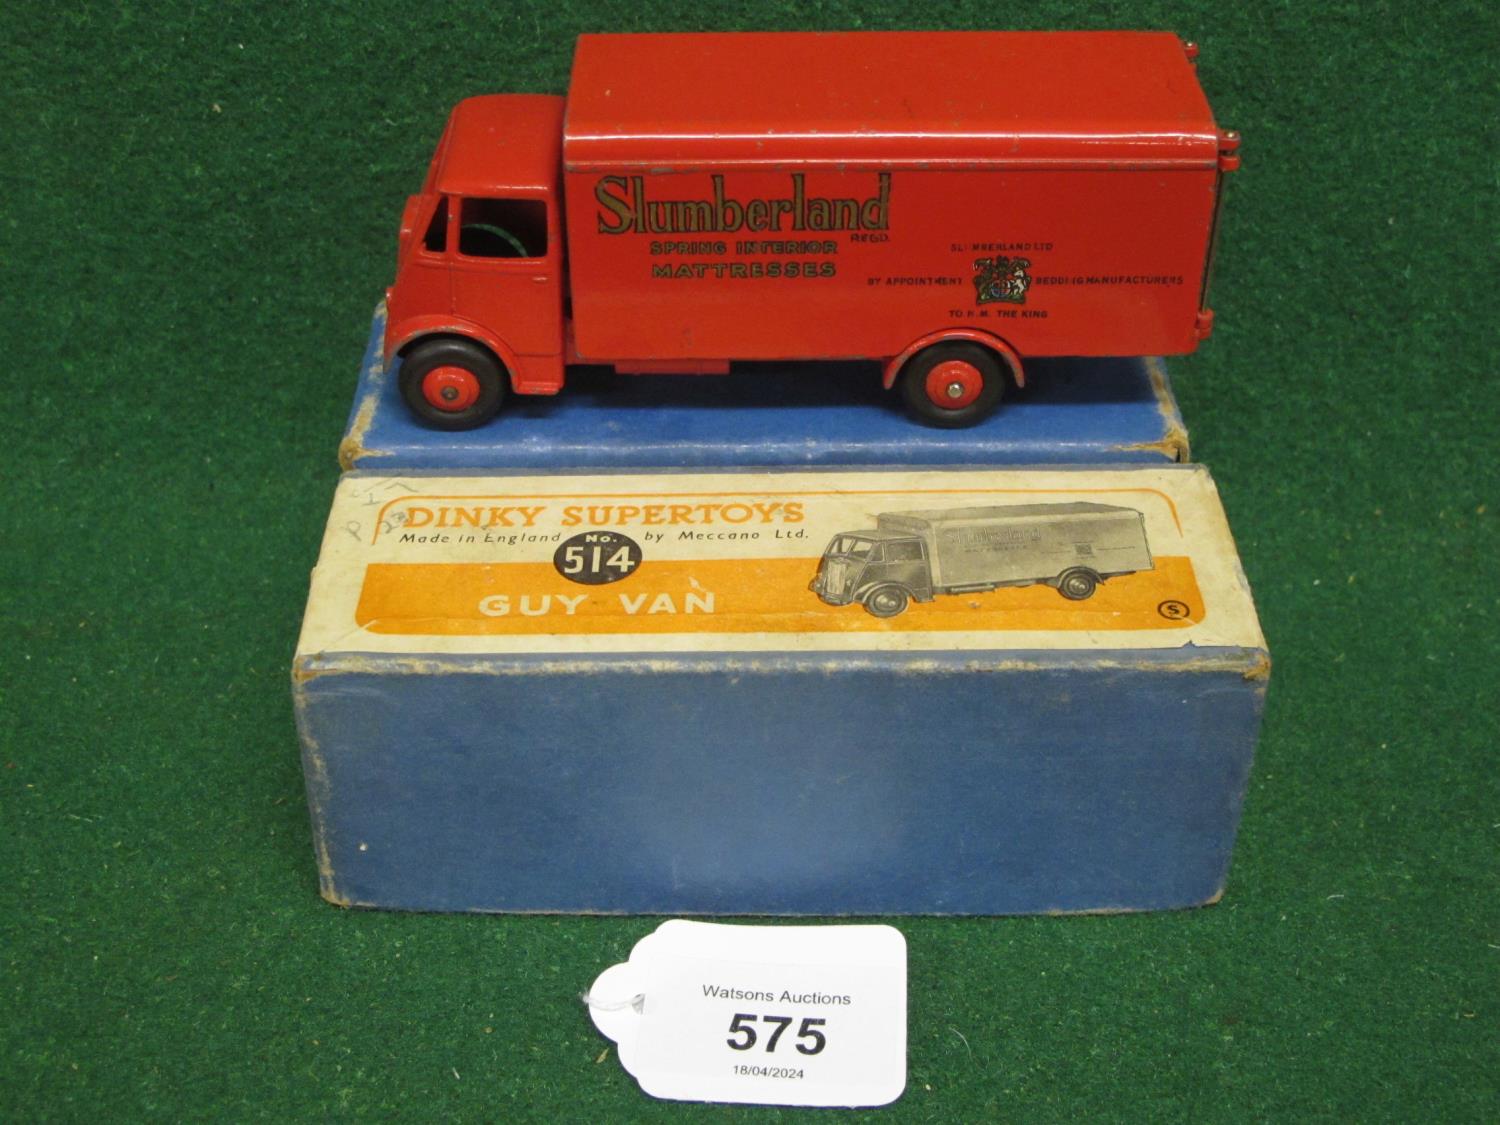 1950-1952 boxed Dinky 514 Guy 1st Type Cab in red Slumberland livery complete with both rear doors - Image 2 of 6